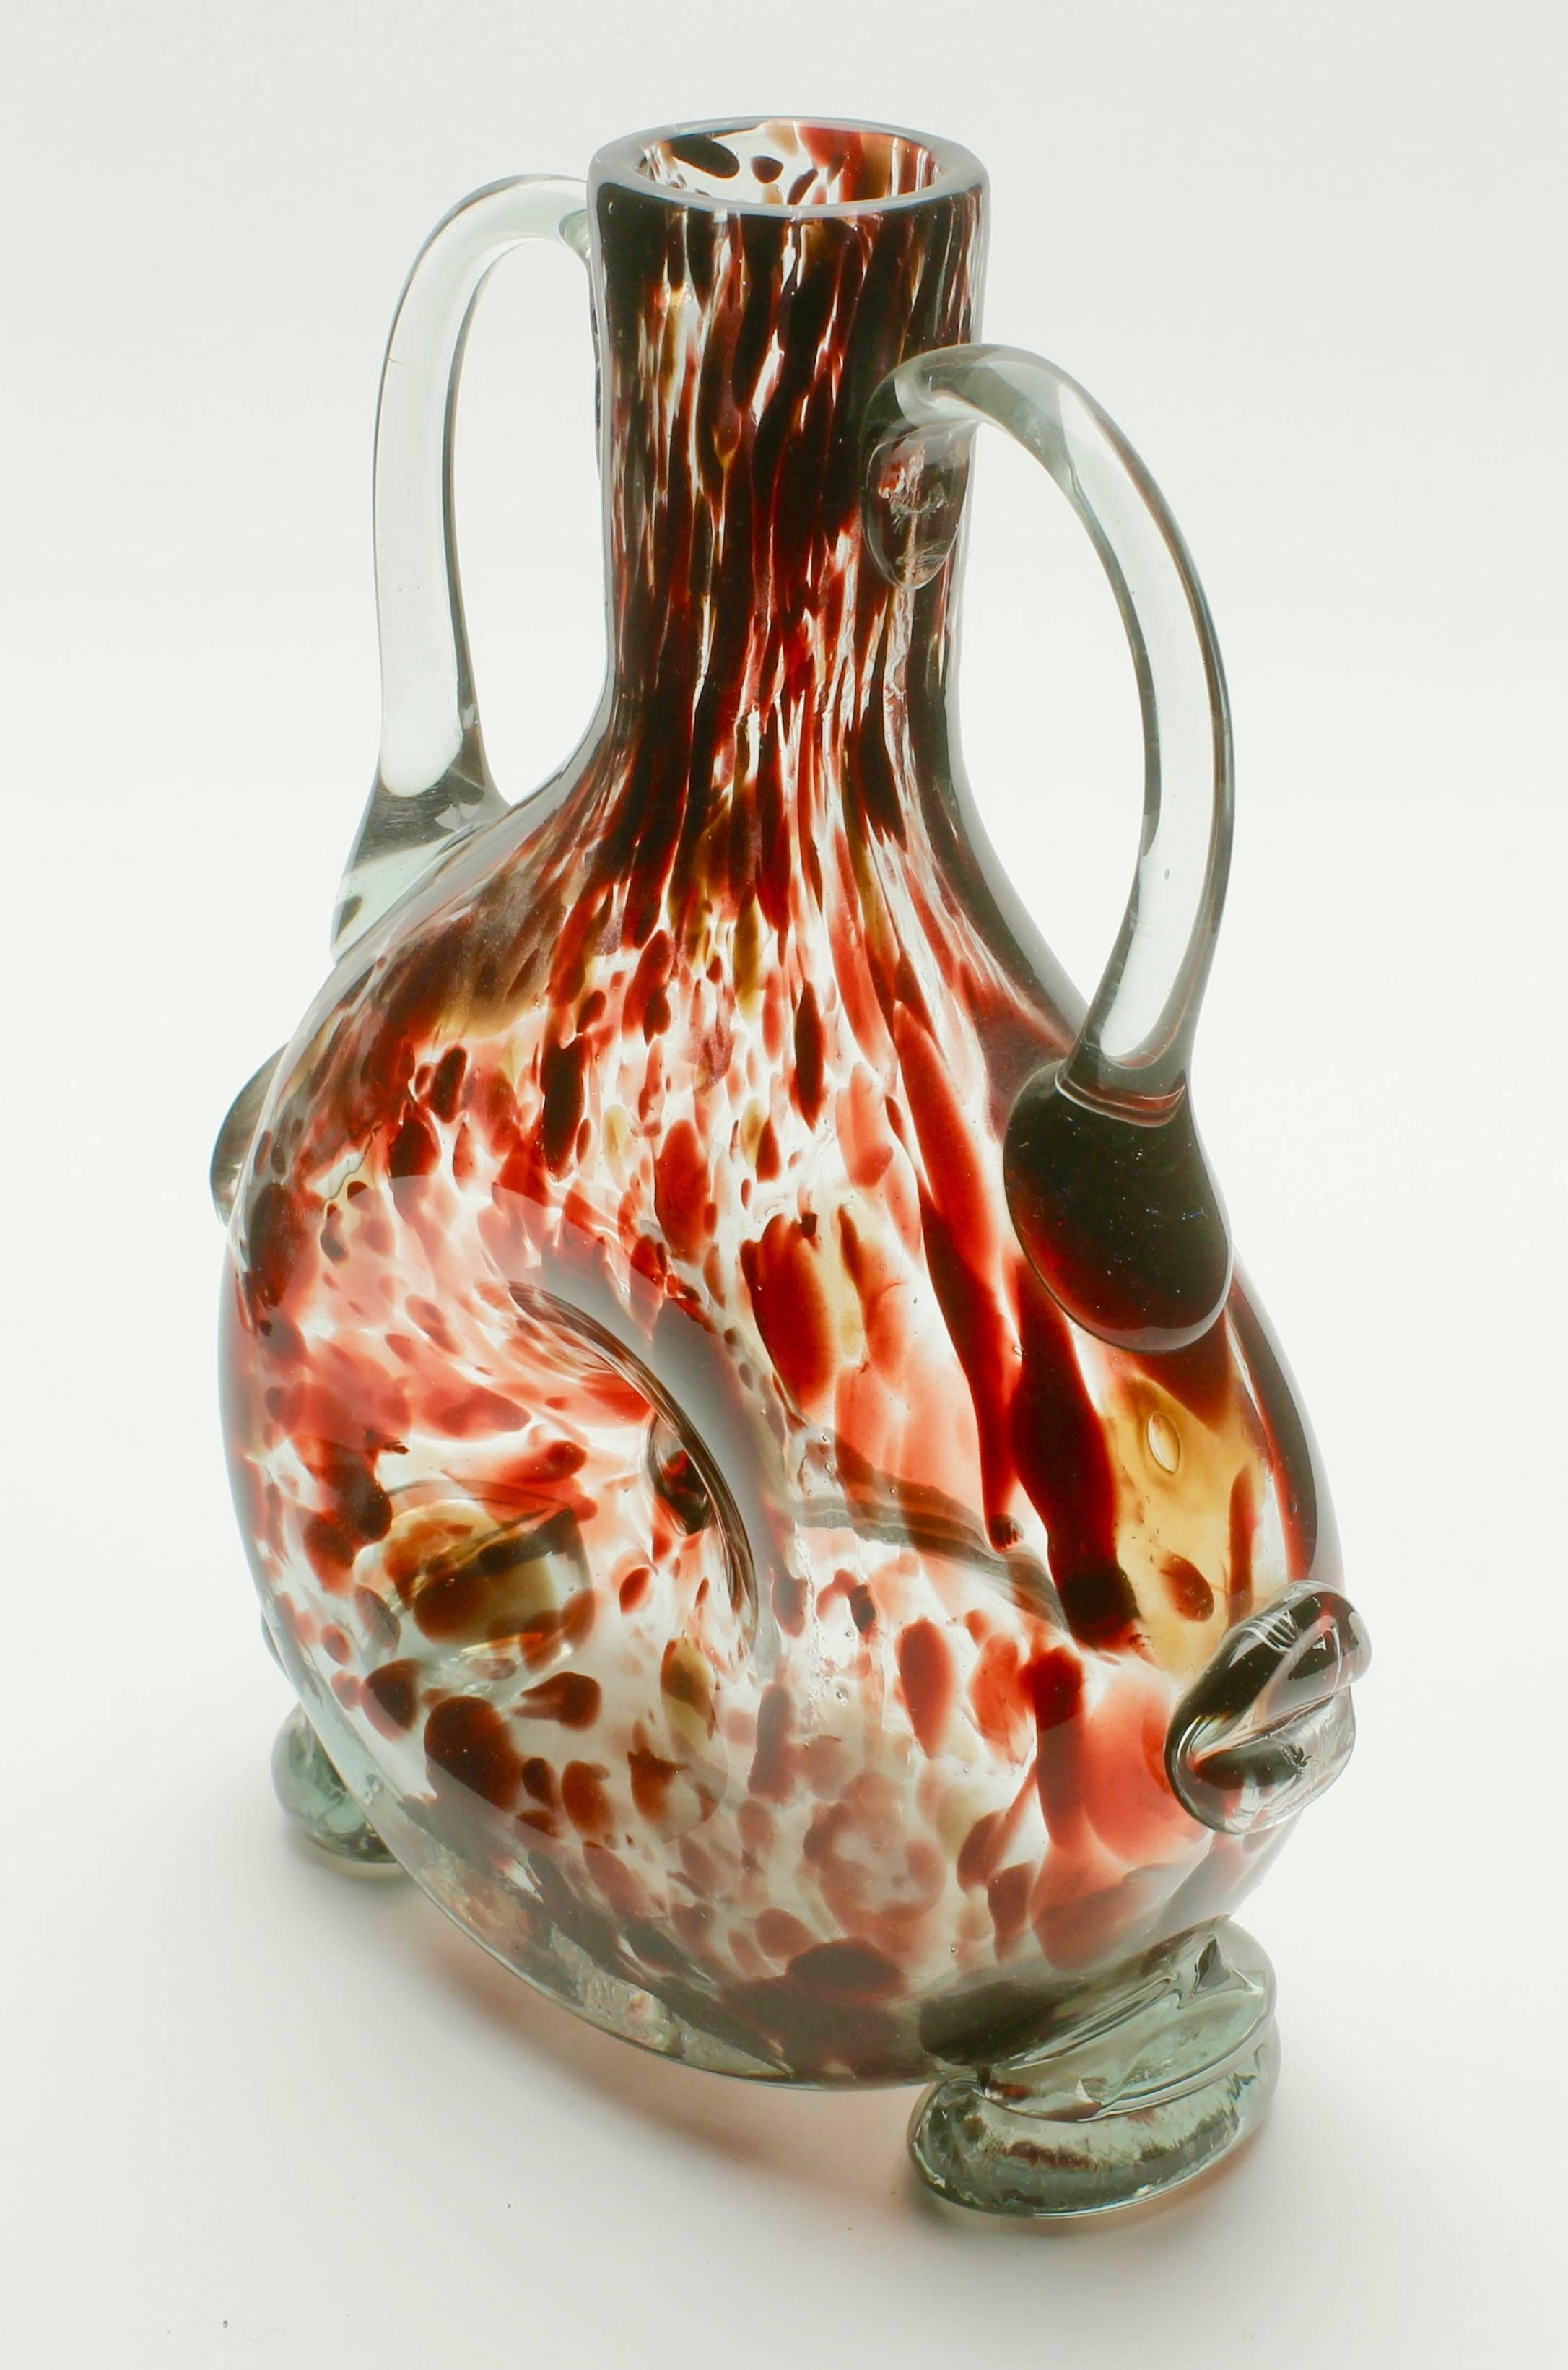 Studio glass vase based on a mouth-blown bottle shape of tortoise-shell splatter pattern (in red/brown), indented in the centre and clear glass used for hand-applied handles, feet and side-details. It has a rough pontil on the bottom and no visible